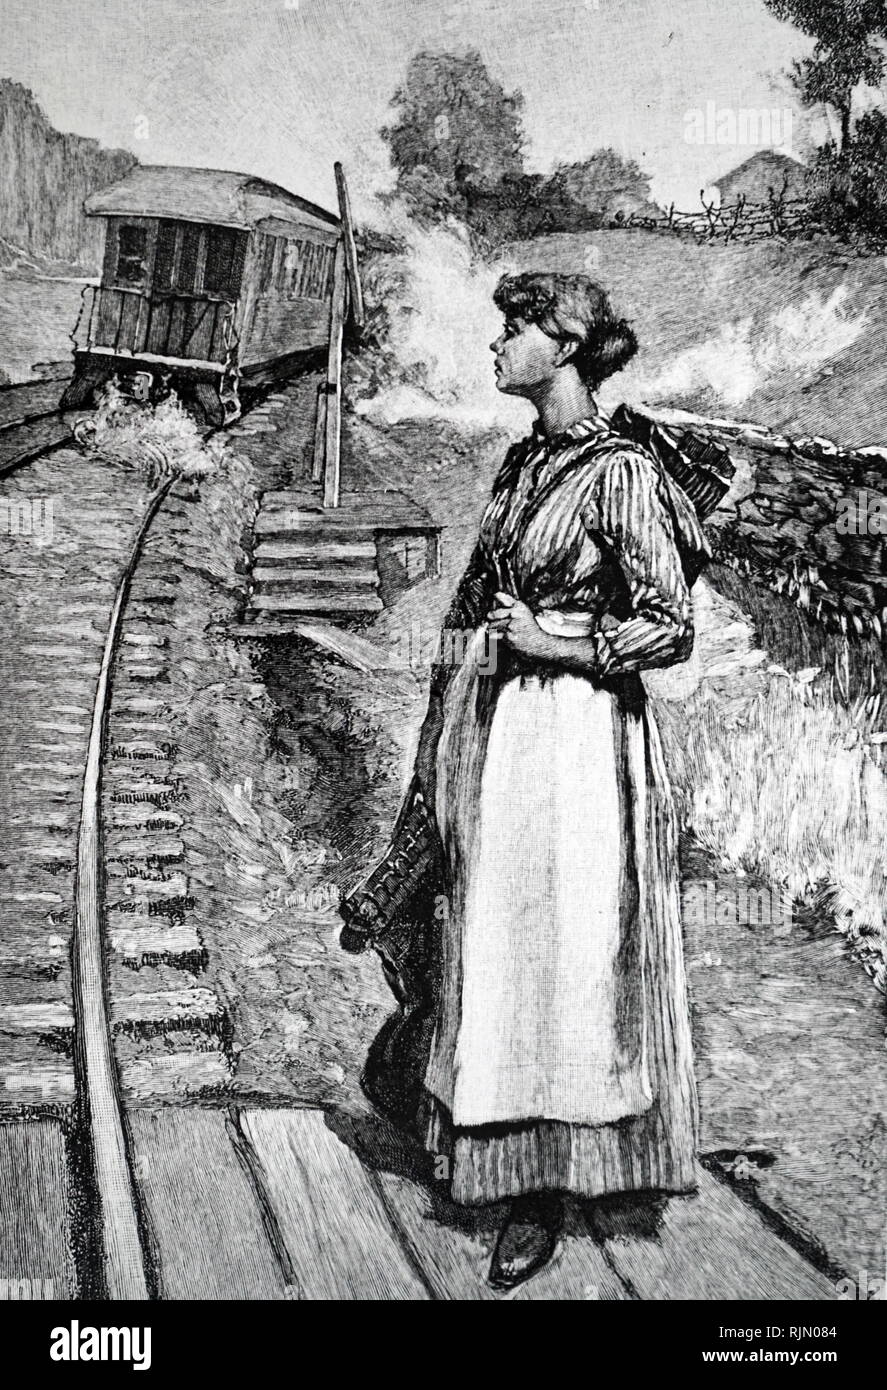 Illustration showing Postmaster's assistant, waiting to put a mailbag on a train at a way-station. American, 1890 Stock Photo